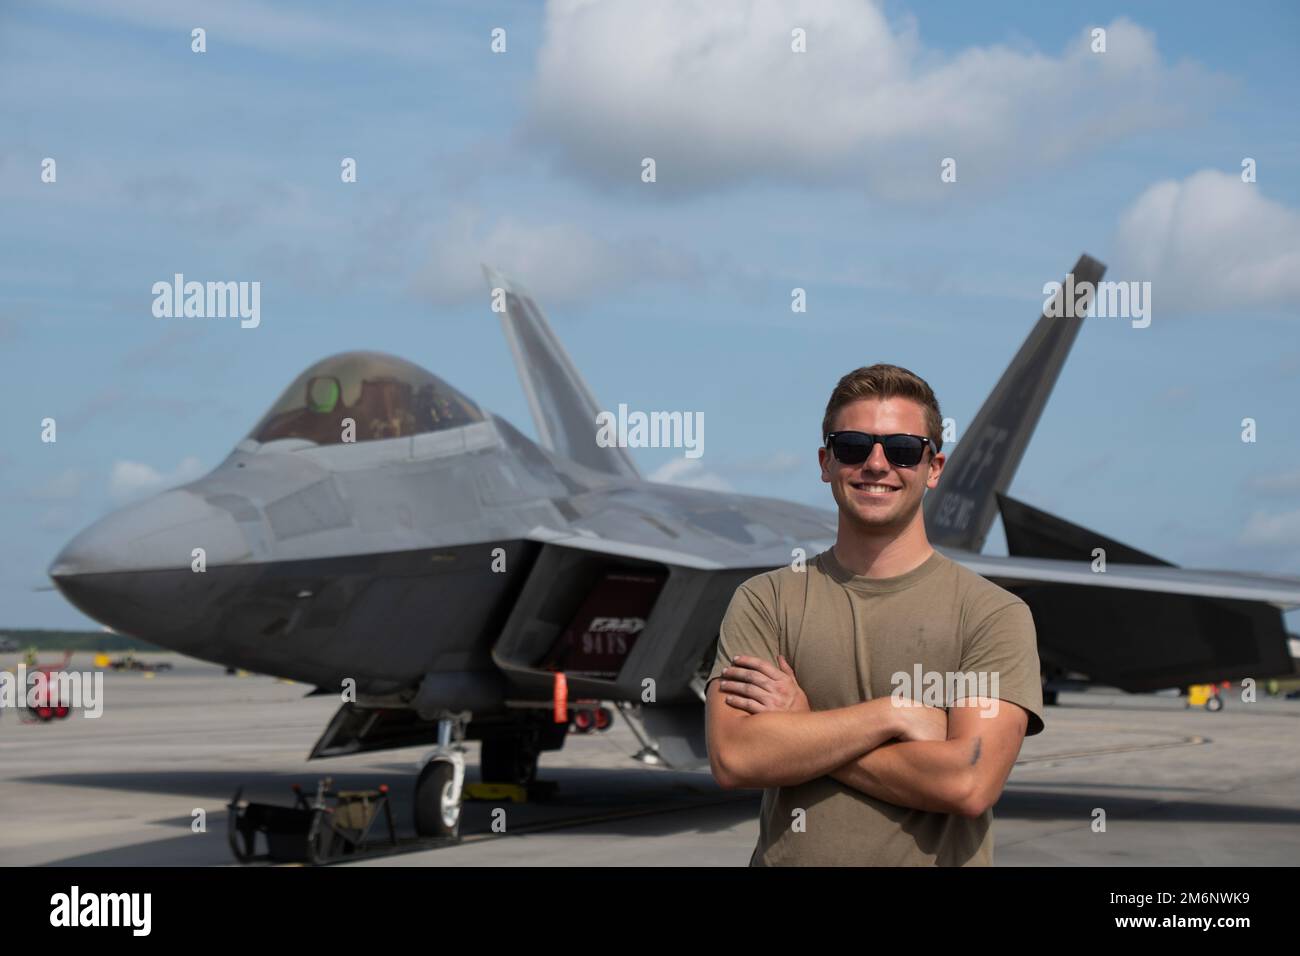 U.S. Air Force Airman 1st Class Adam Sickels, a crew chief with the 192nd Aircraft Maintenance Squadron, Virginia Air National Guard, poses for a photo in front of an F-22 Raptor May 3, 2022, at the Air Dominance Center, a Combat Readiness Training Center, in Savannah, Georgia. Sentry Savannah 2022 is the Air National Guard’s premier counter air exercise, encompassing 10 units of fourth and fifth generation fighter aircraft, which tests the capabilities of our warfighters in a simulated near-peer environment and trains the next generation of fighter pilots for tomorrow’s fight. Stock Photo